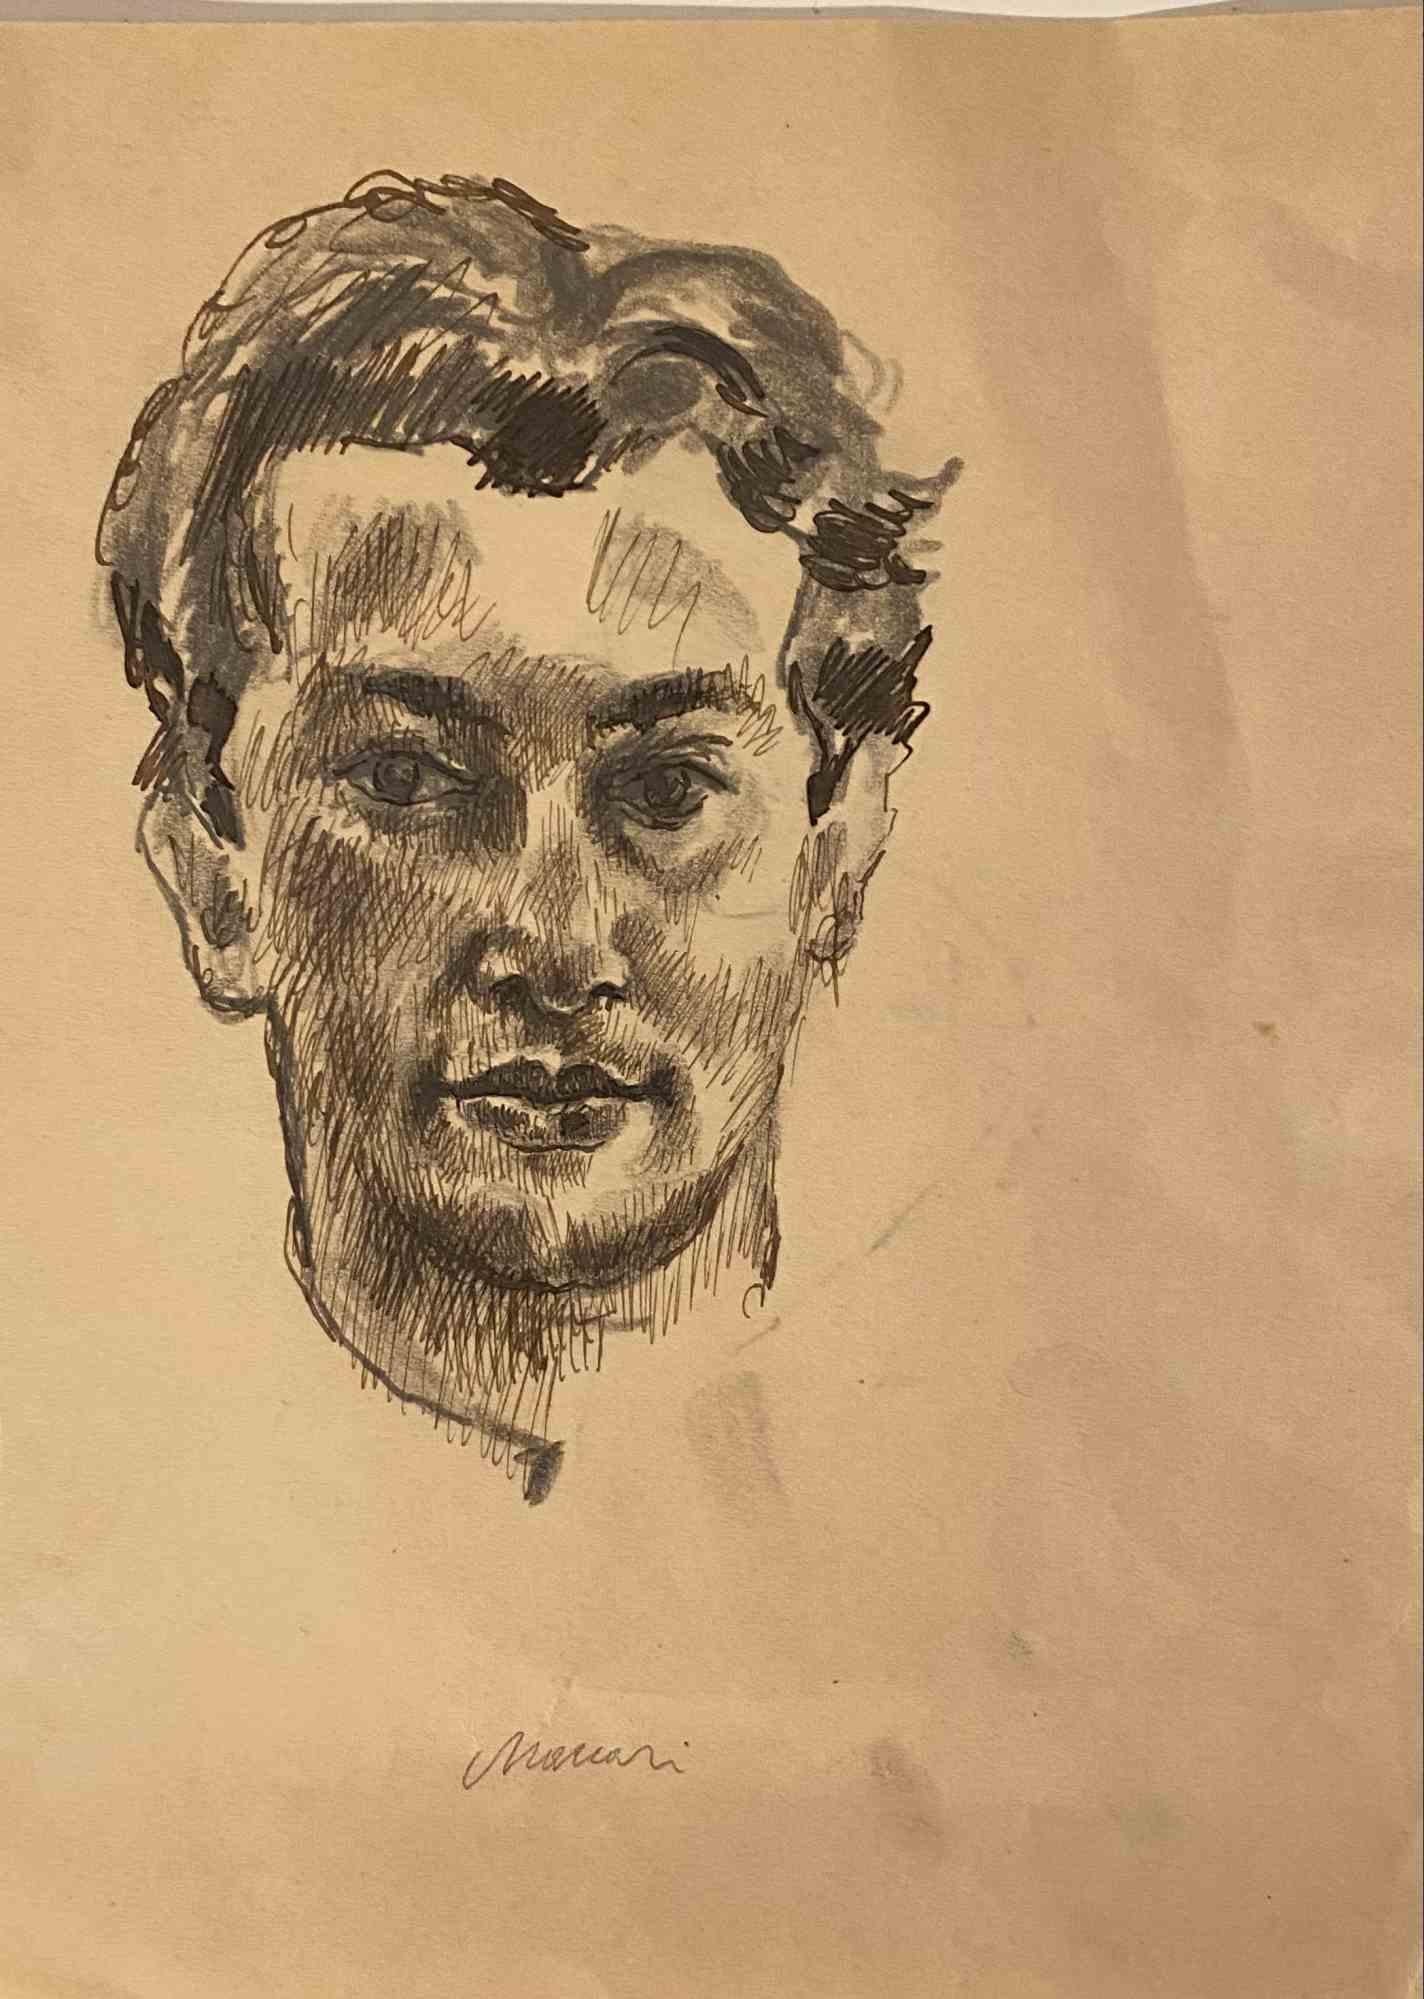 Portrait is an Original Drawing in pencil carbon on creamy-colored paper realized by Mino Maccari in the mid-20th century. 

Hand-signed by the artist on the lower. With another portrait drawing on the rear.

Good conditions.

Mino Maccari